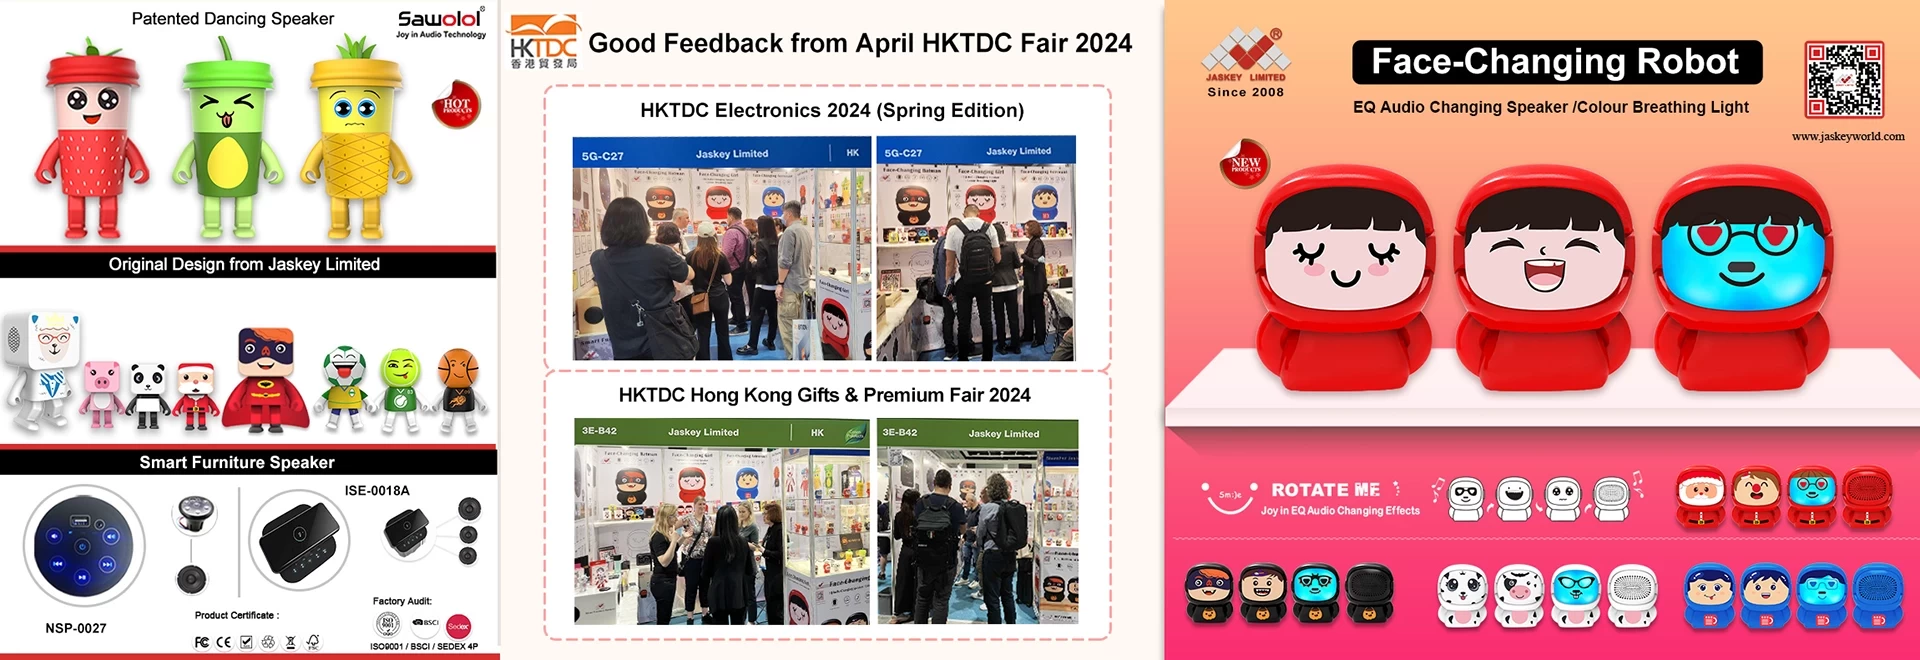 Good feedback from HKTDC Electronics 2024 (Spring Edition) and Gifts & Premium Fair